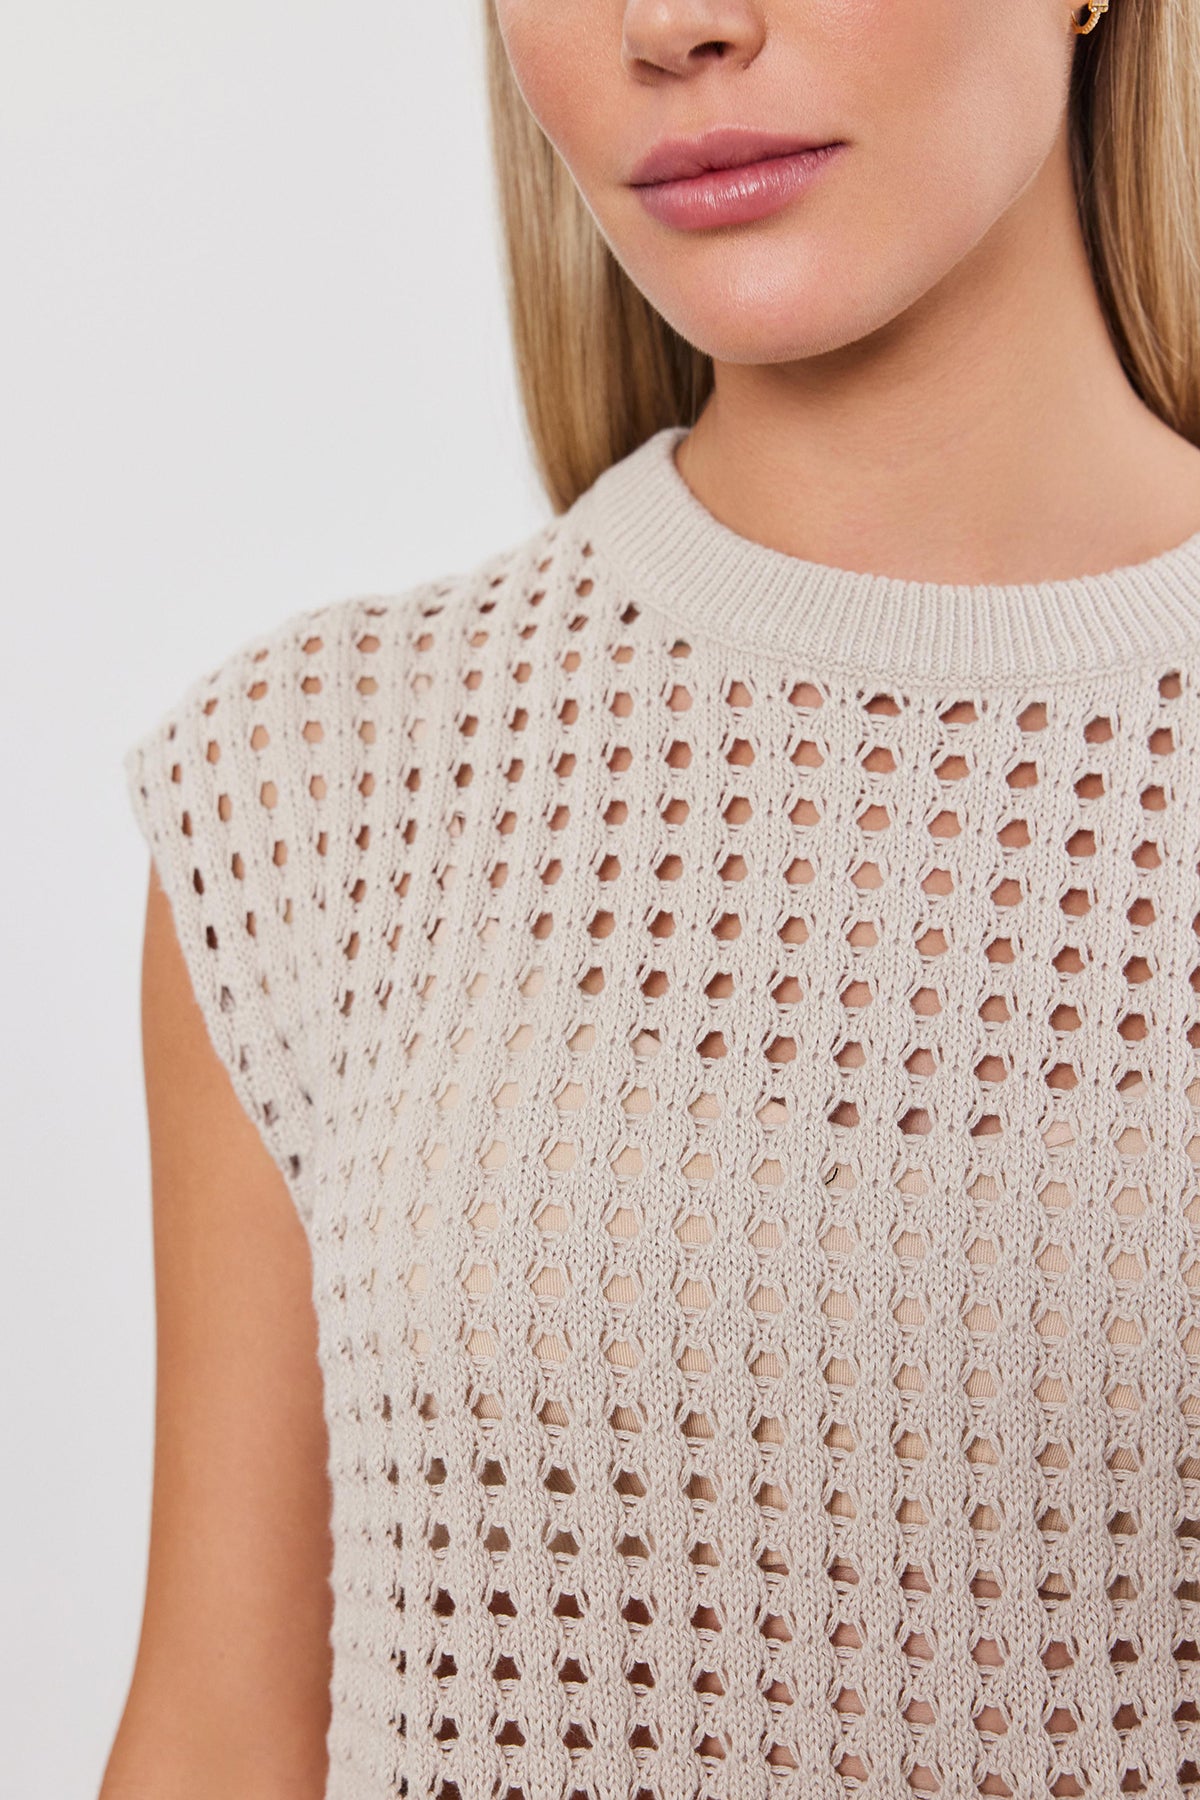   Close-up of a woman wearing a beige cotton cashmere sleeveless MAISON SWEATER, focusing on the intricate pattern of the knitwear by Velvet by Graham & Spencer. 